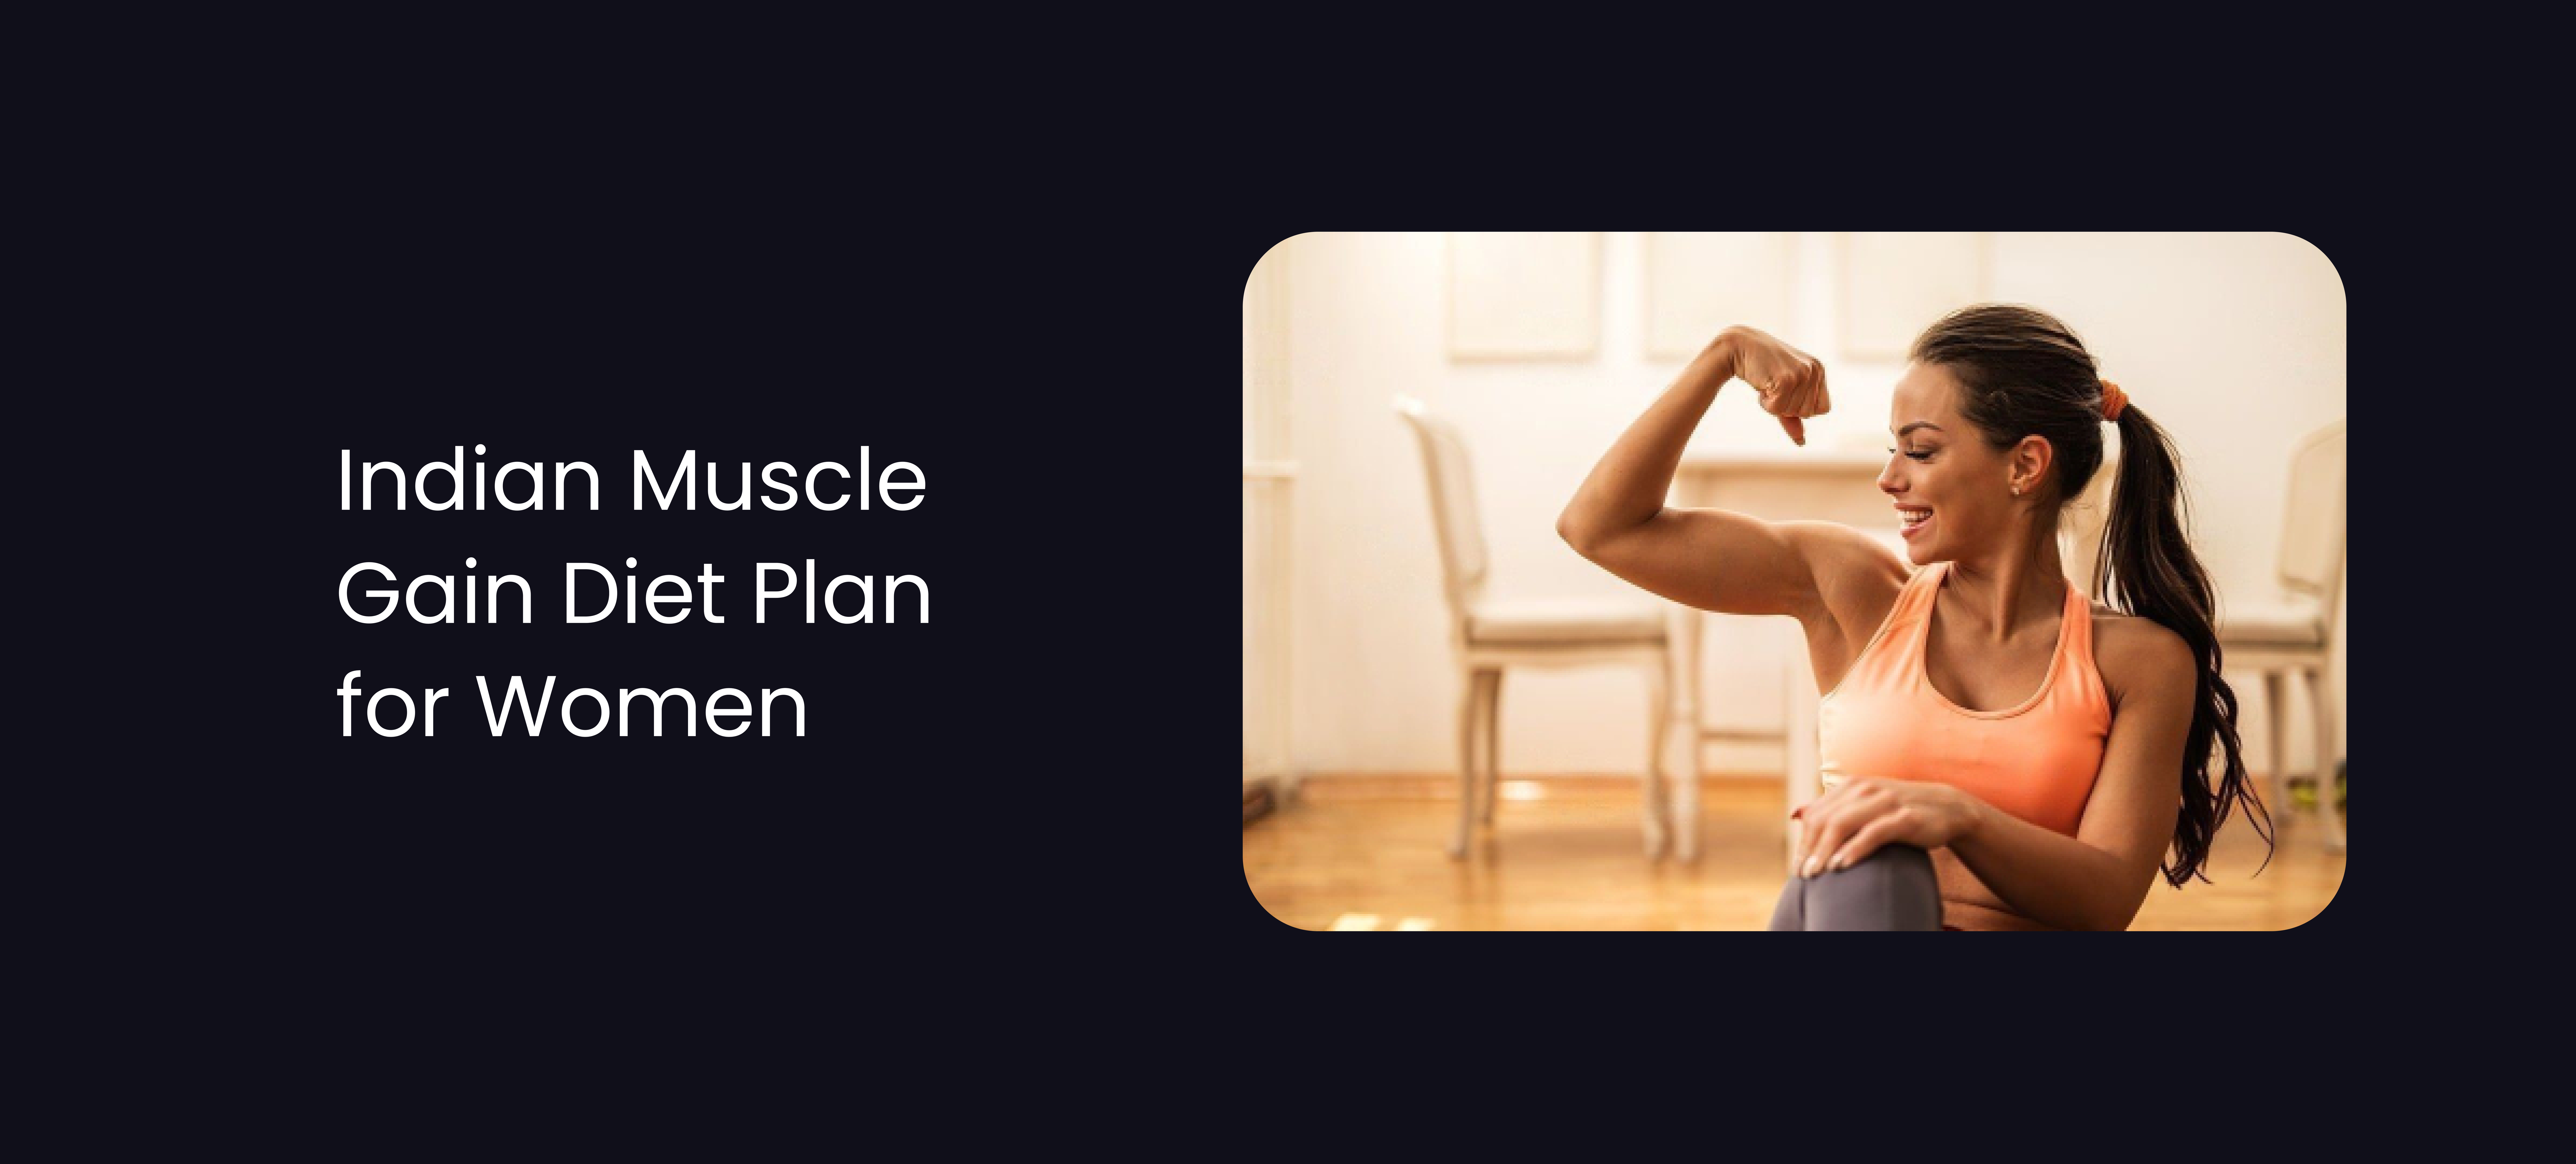 Indian Muscle Gain Diet Plan for Women